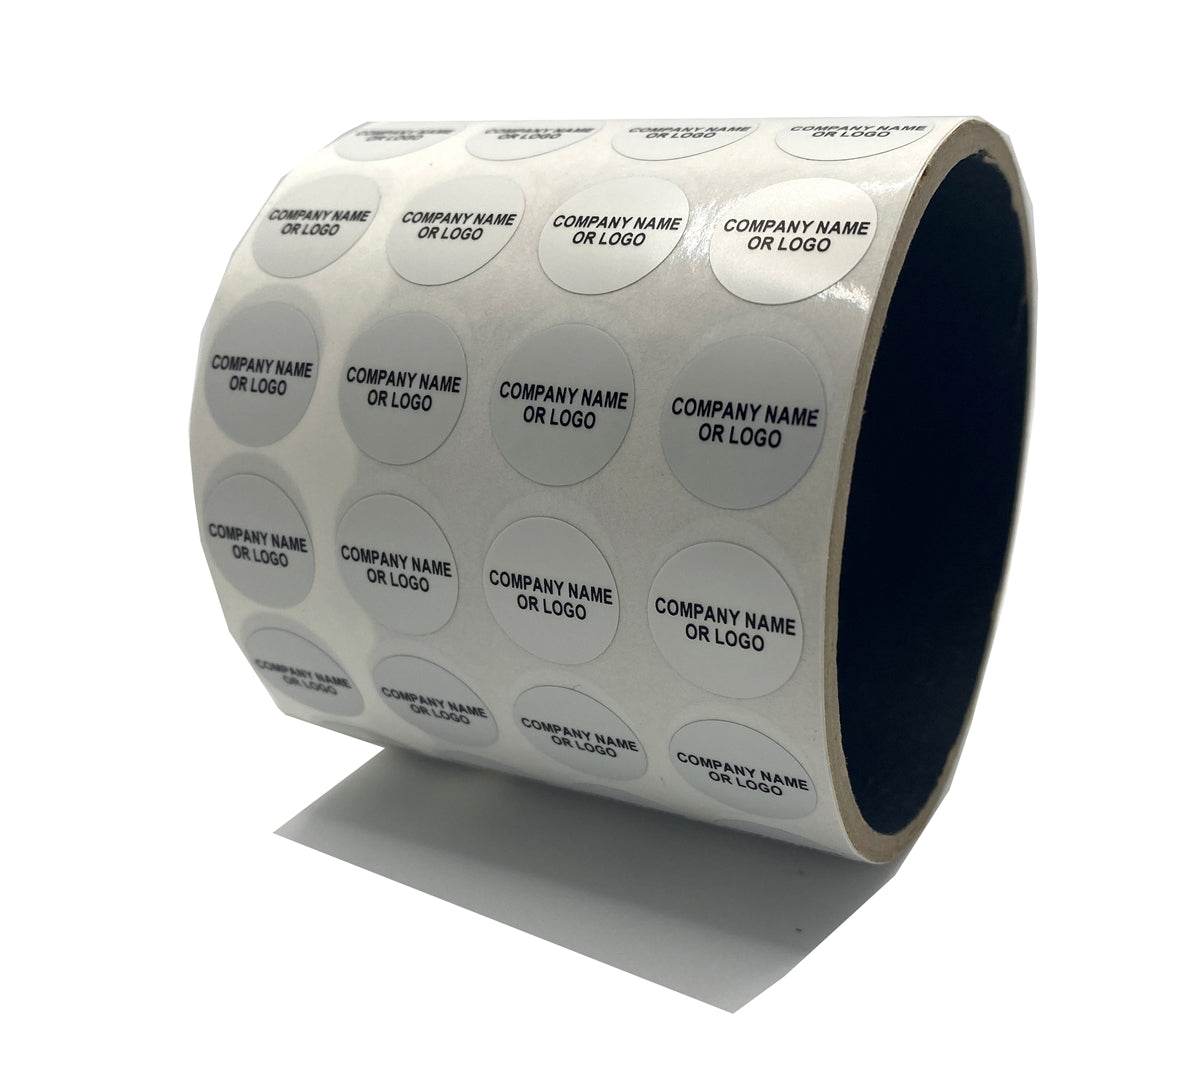 5,000 Metallic Tamper Evident Security Labels Silver Matte TamperVoidPro Seal Sticker, Round/ Circle 0.75" diameter (19mm). Custom Printed. >Click on item details to customize.